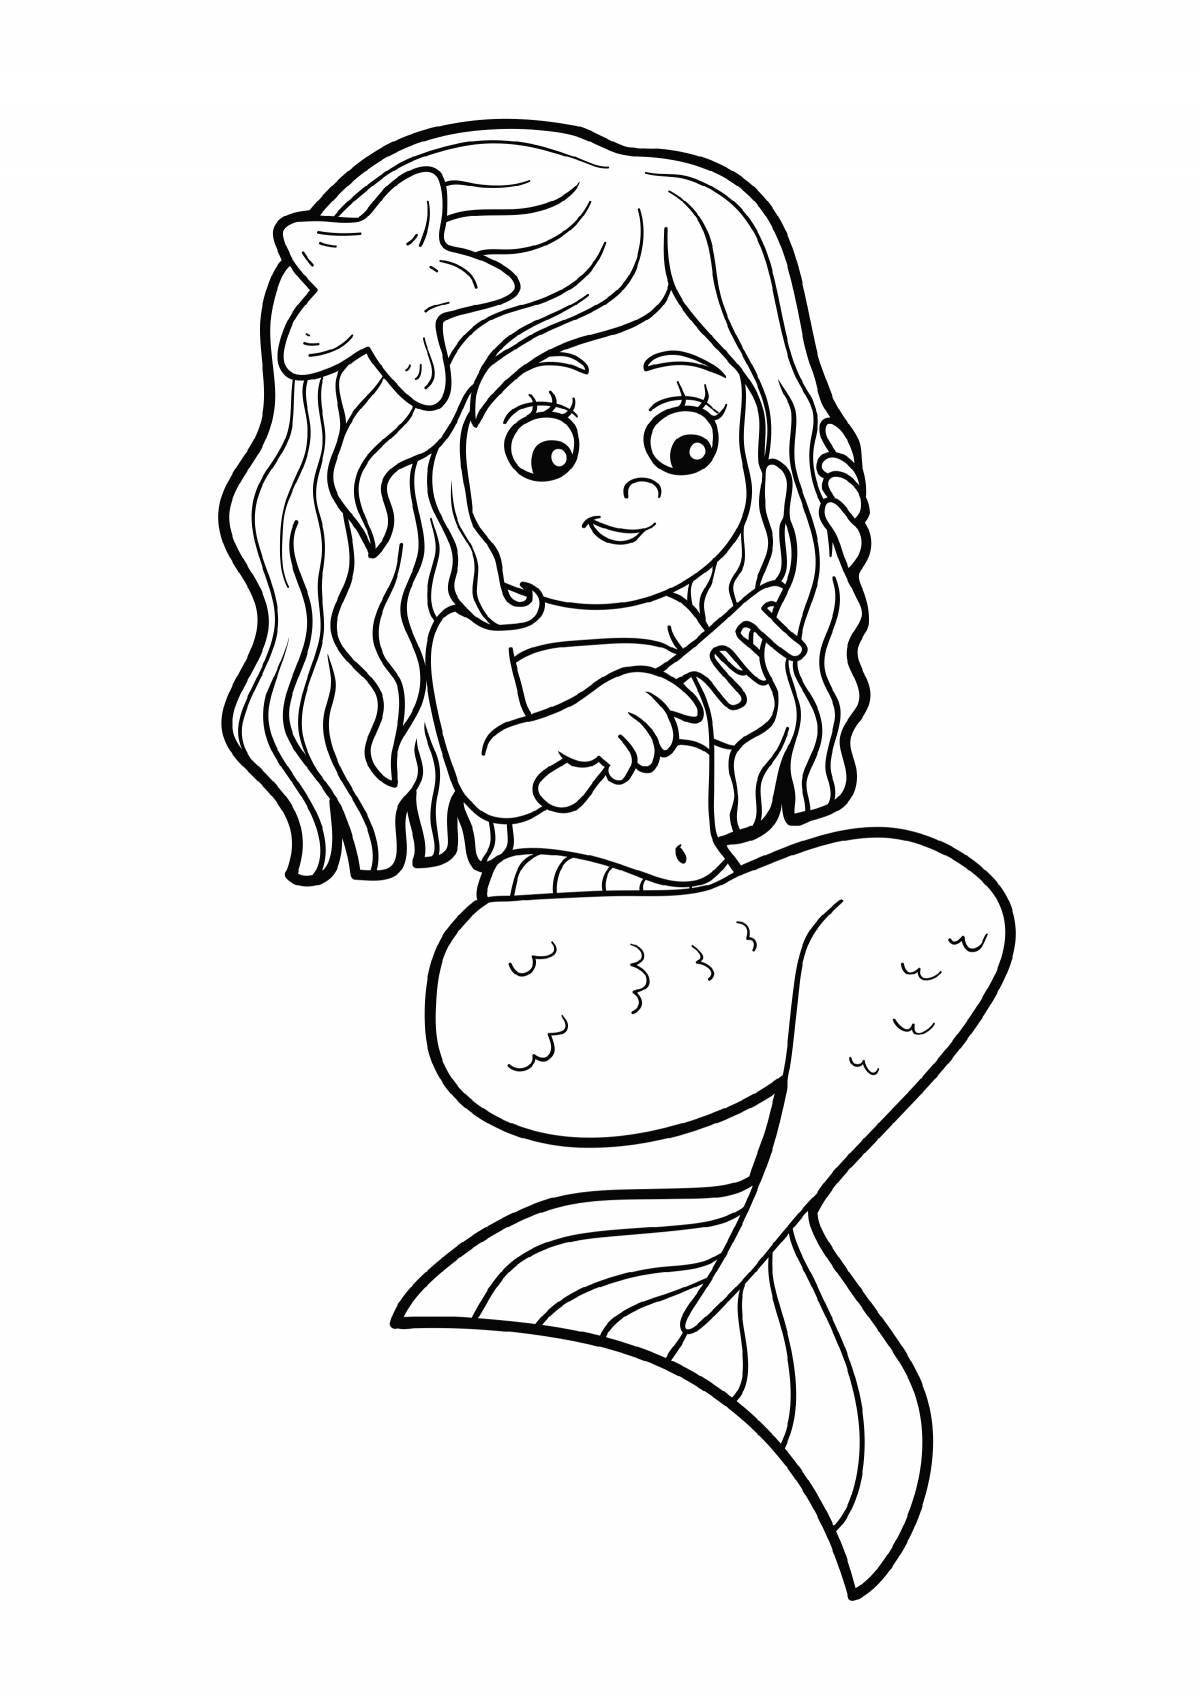 Fun coloring mermaid for 3-4 year olds